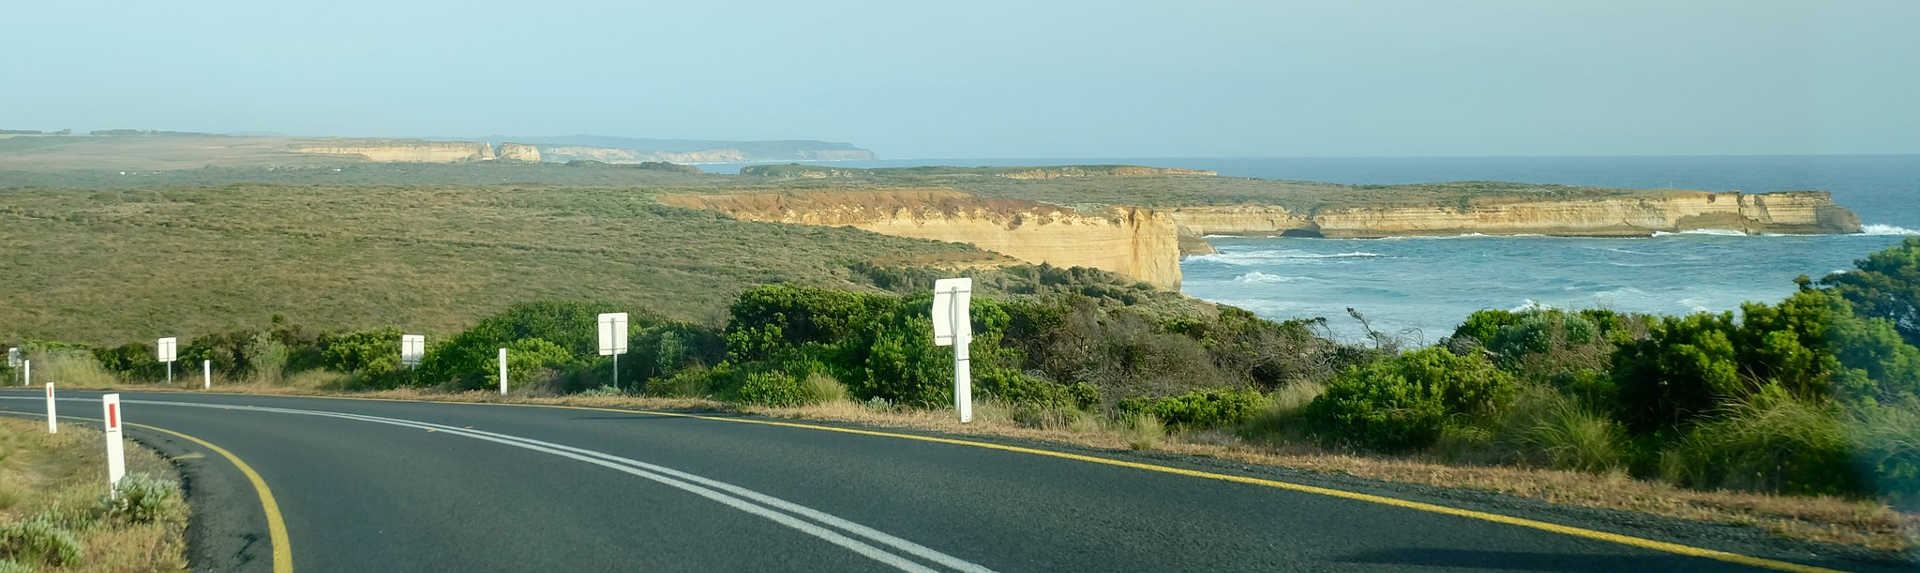 Where should I stay when visiting the Great Ocean Road?